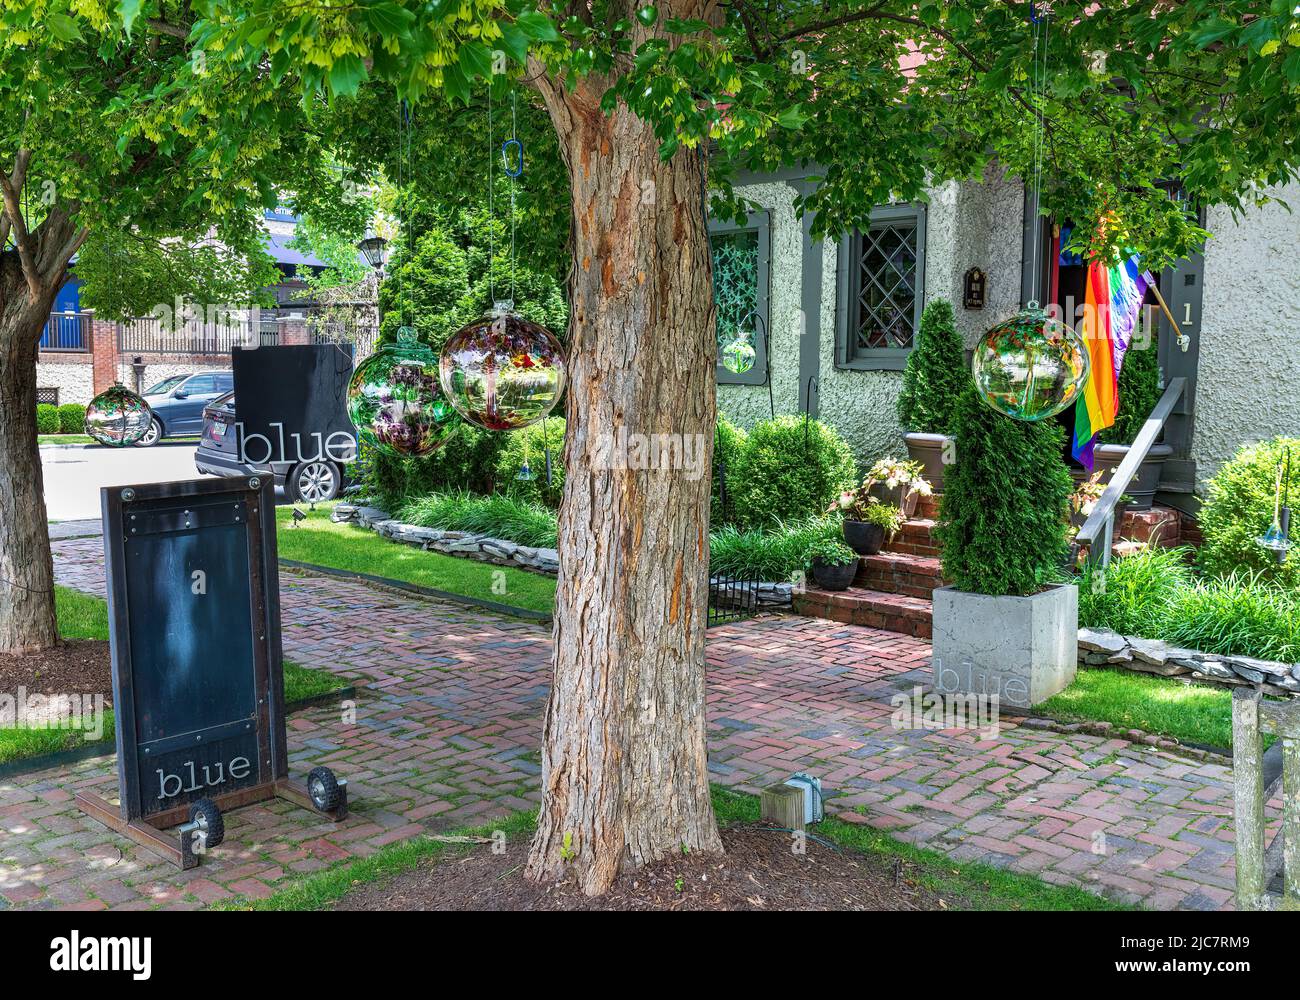 BILTMORE VILLAGE in ASHEVILLE, NC, USA-5 JUNE 2022: The Blue Goldsmith shop entrance, with multiple colorful glass globes hanging in shady foreground. Stock Photo